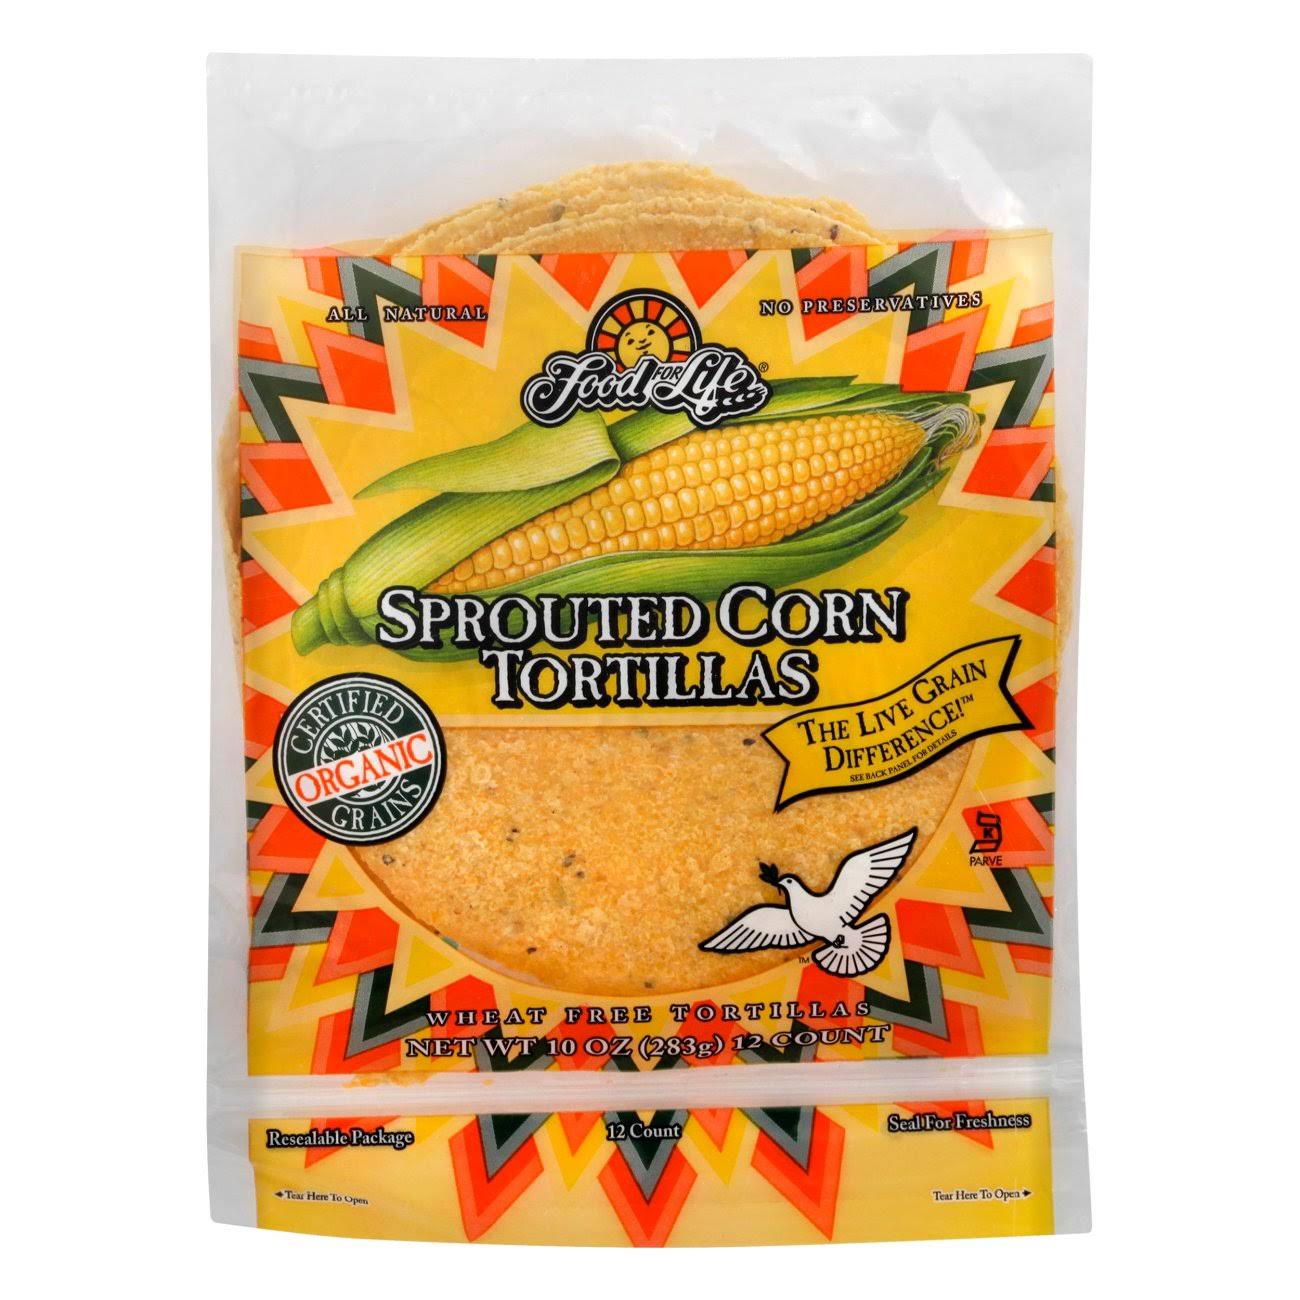 Food for Life Sprouted Corn Tortillas - Pack of 12